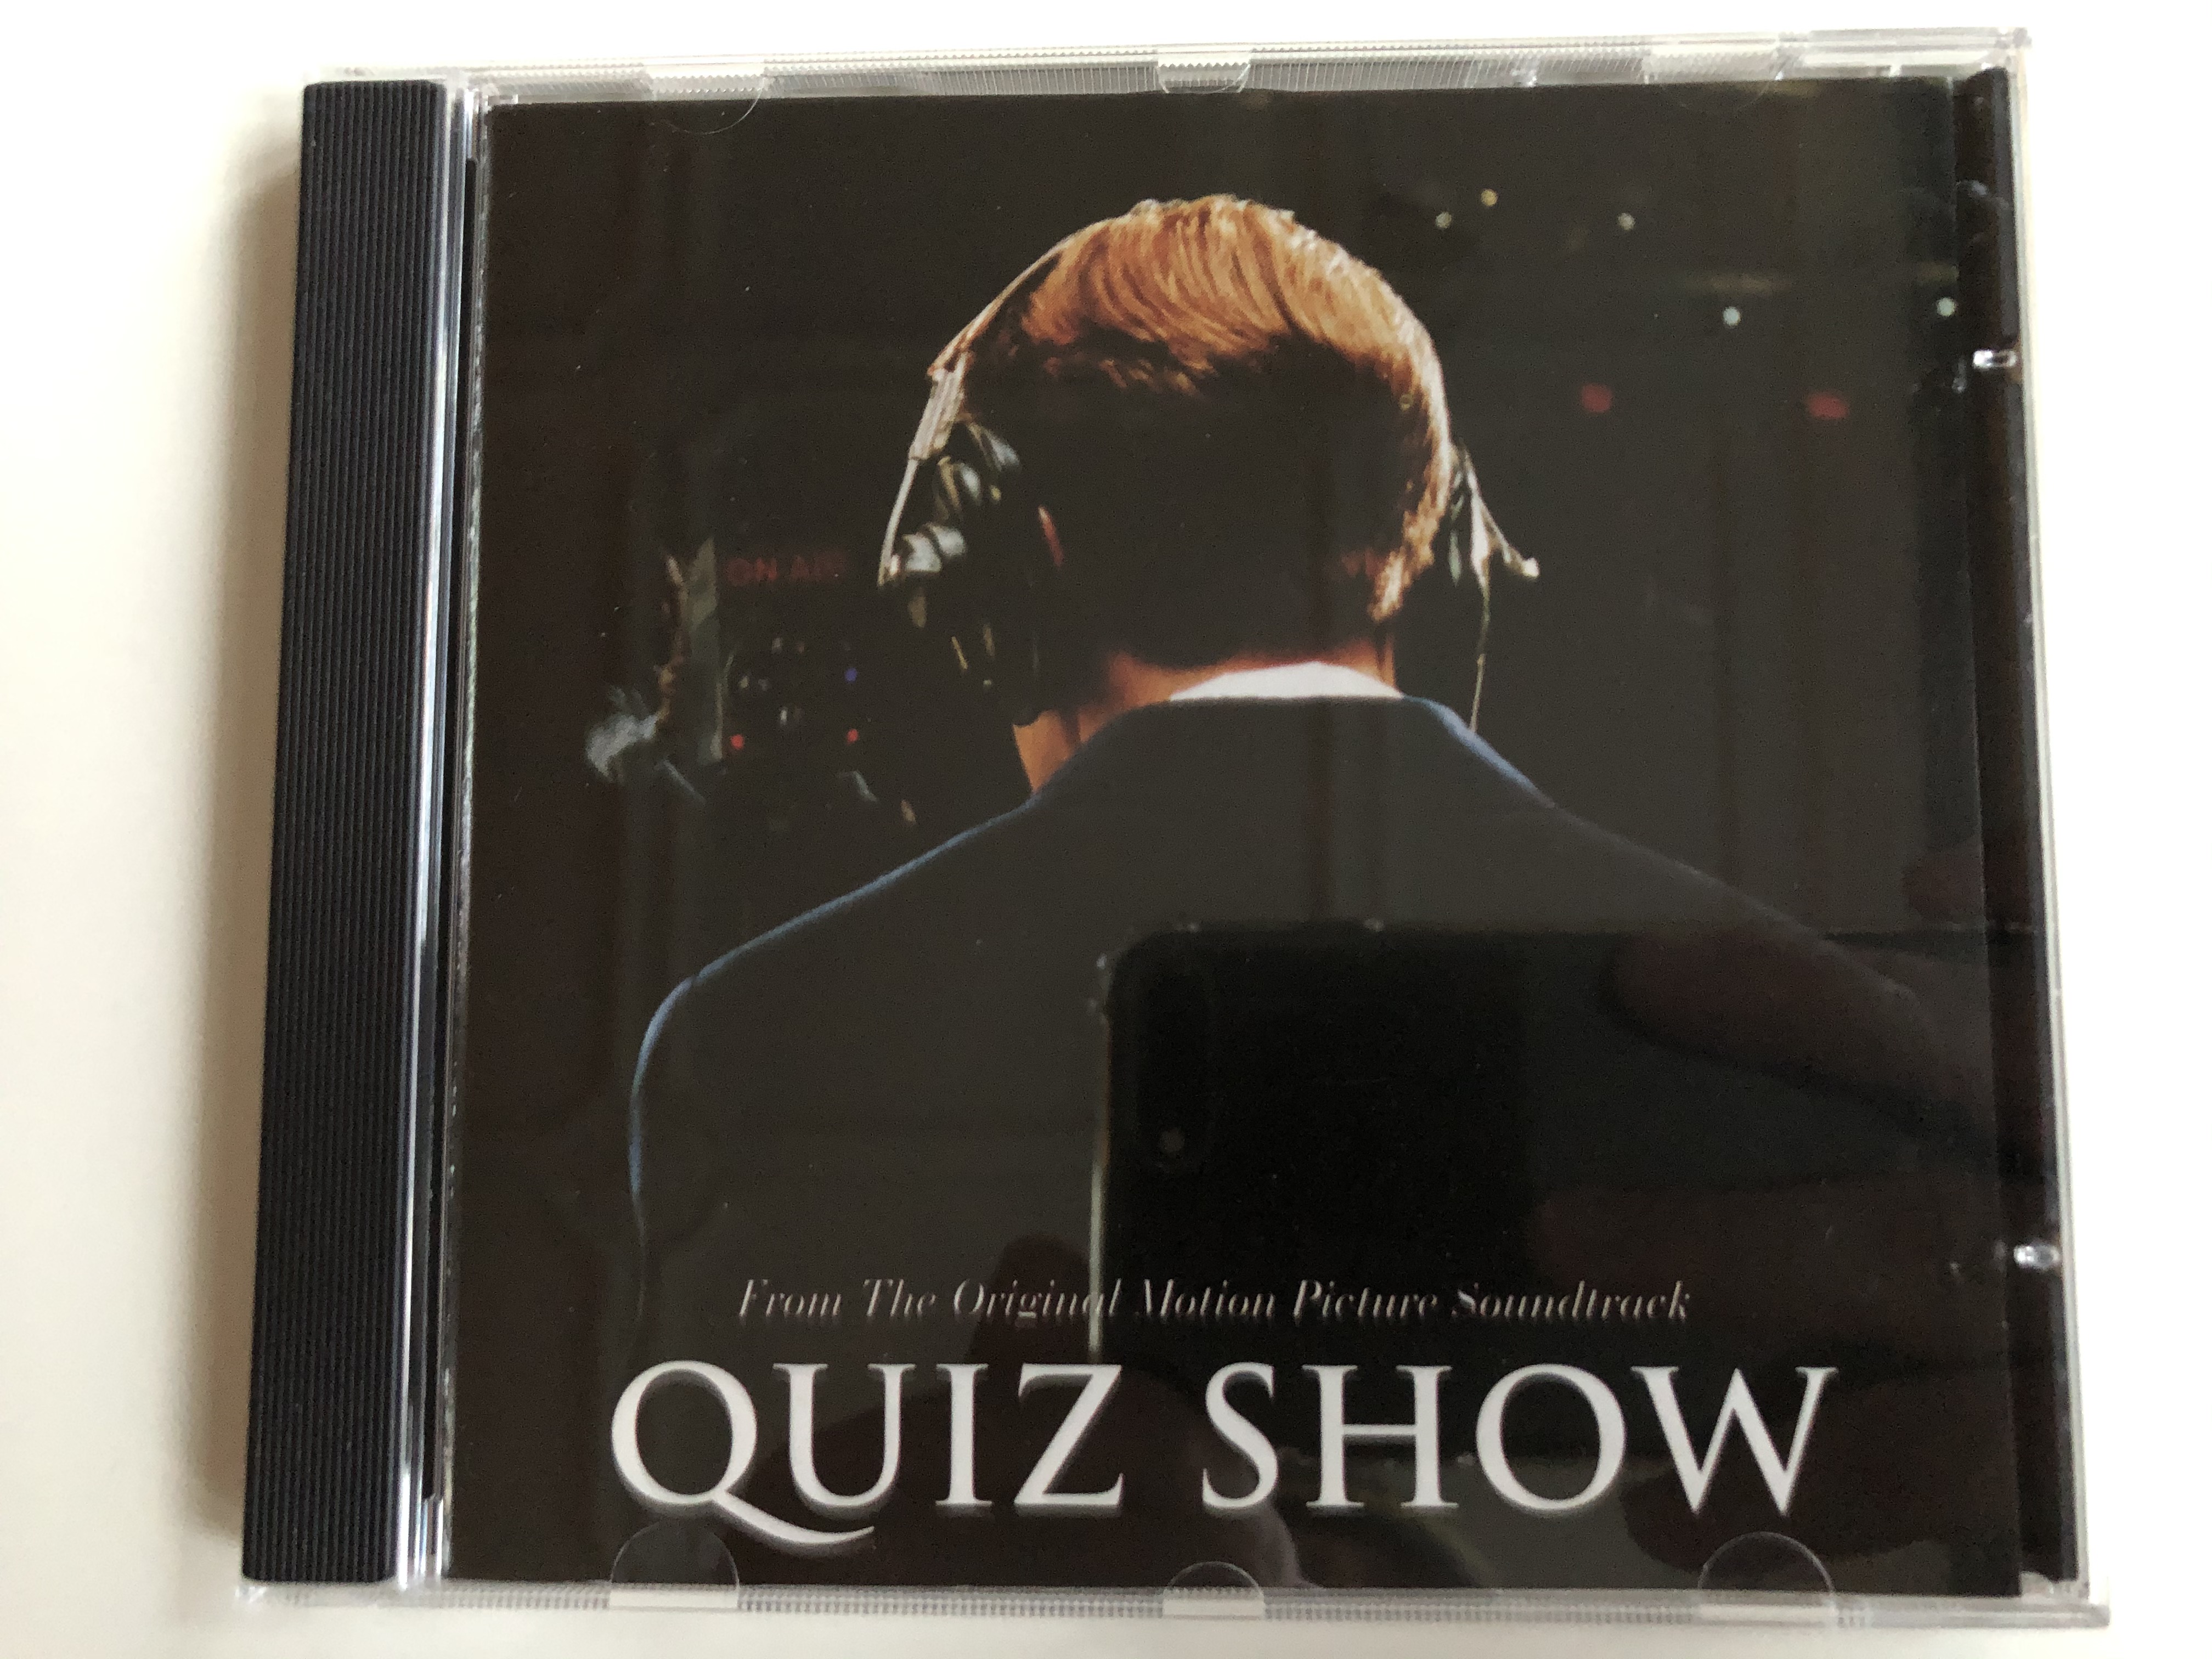 from-the-original-motion-picture-soundtrack-quiz-show-hollywood-records-audio-cd-0120002hwr-1-.jpg